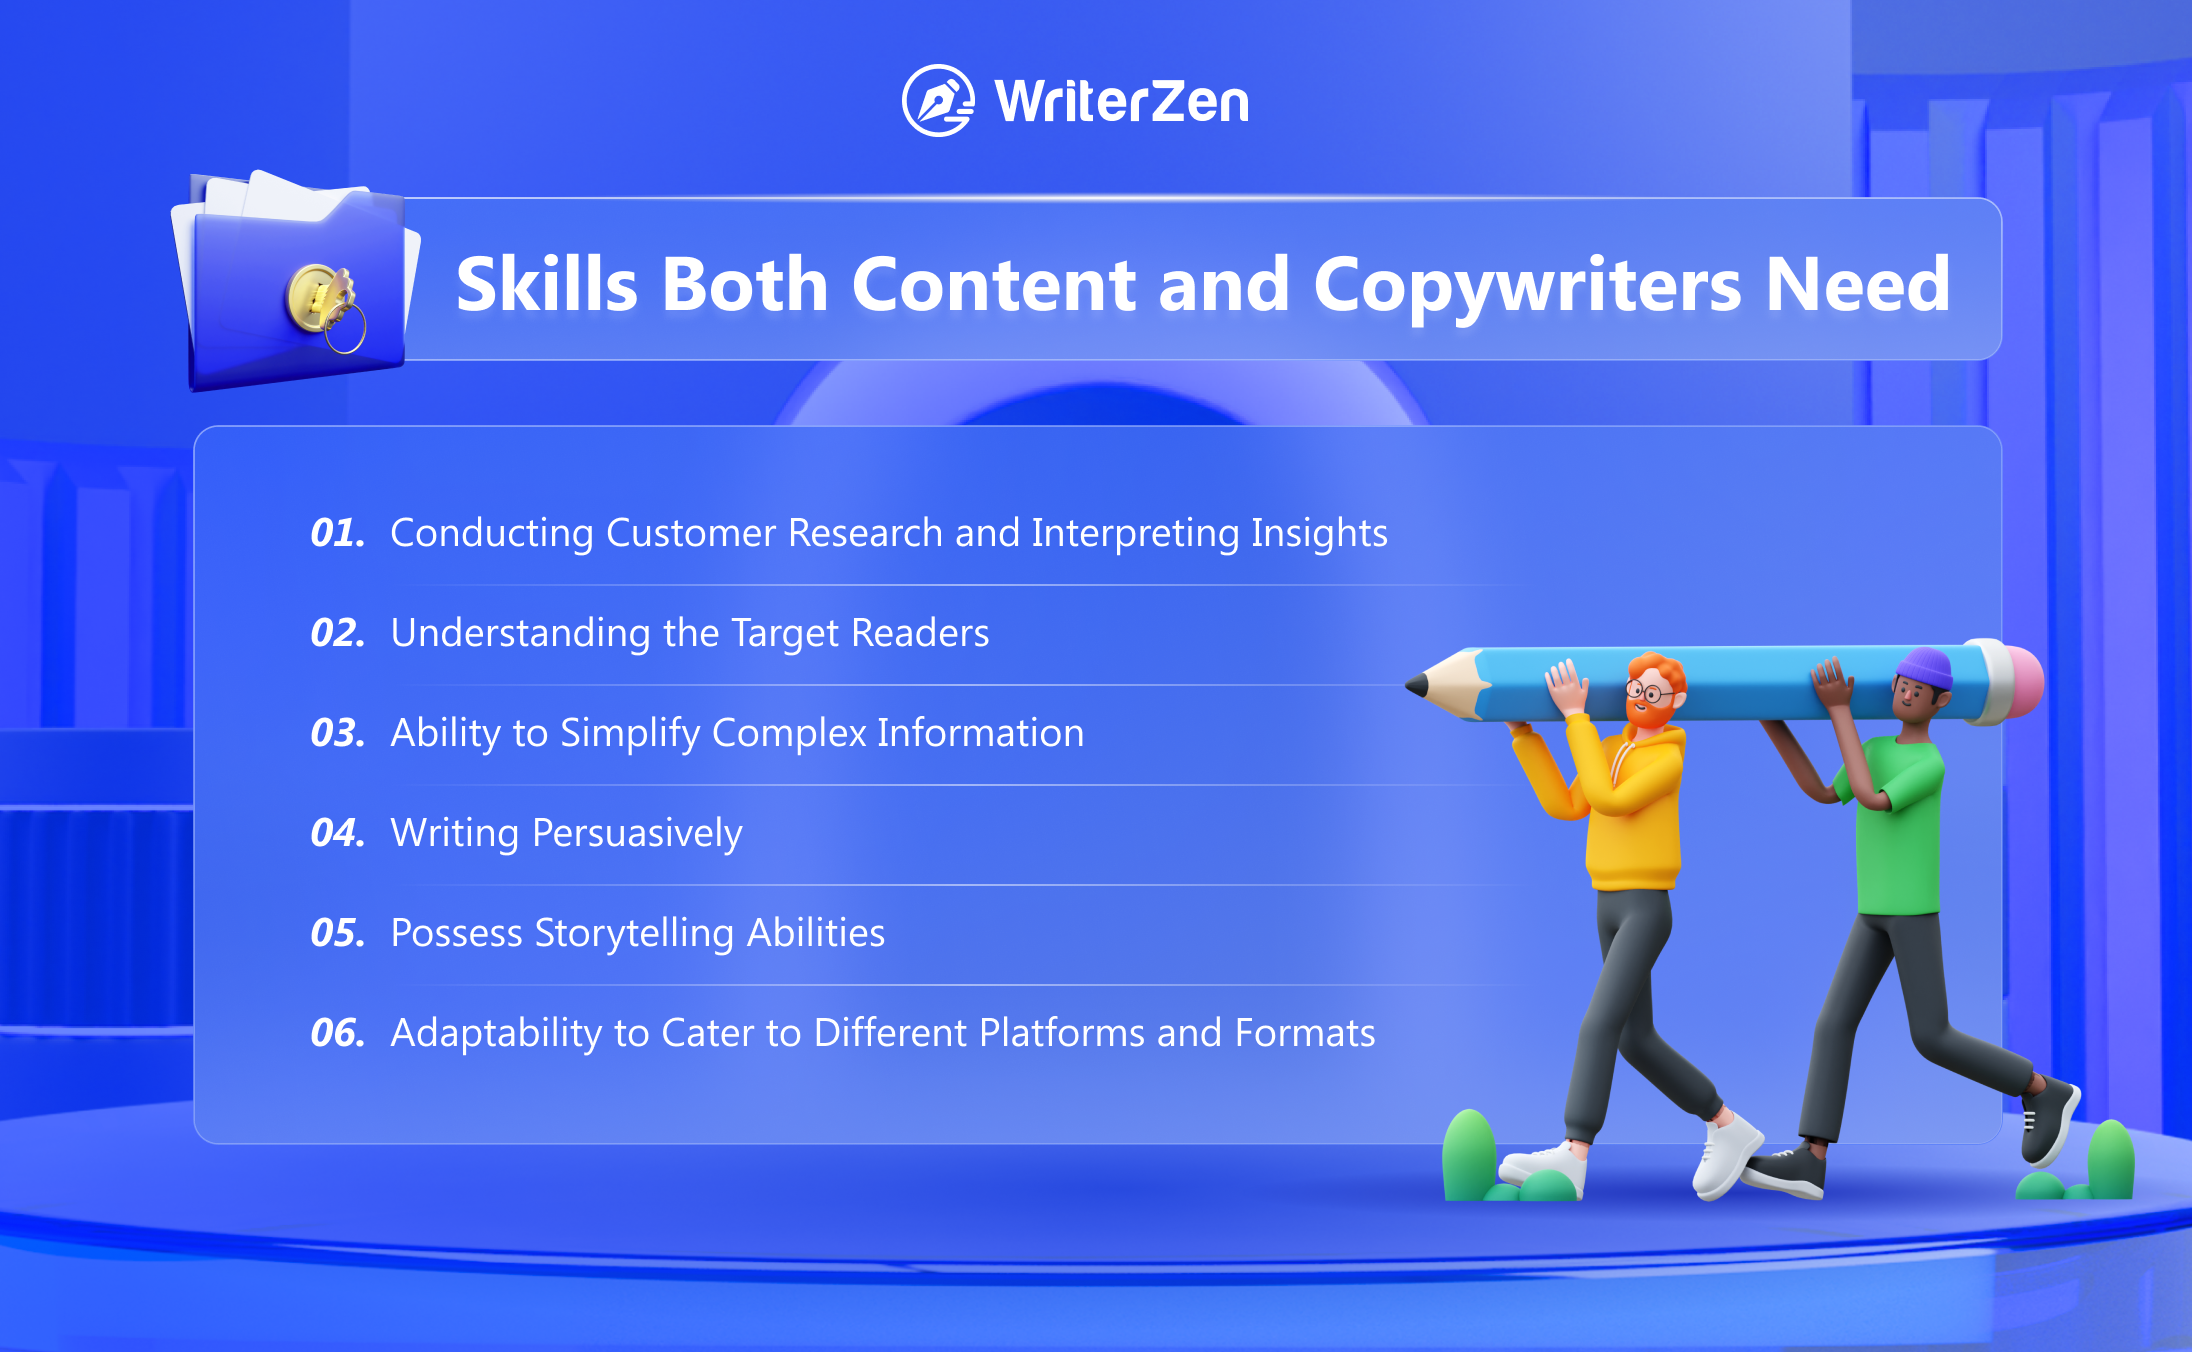 Skills Both Content and Copywriters Need